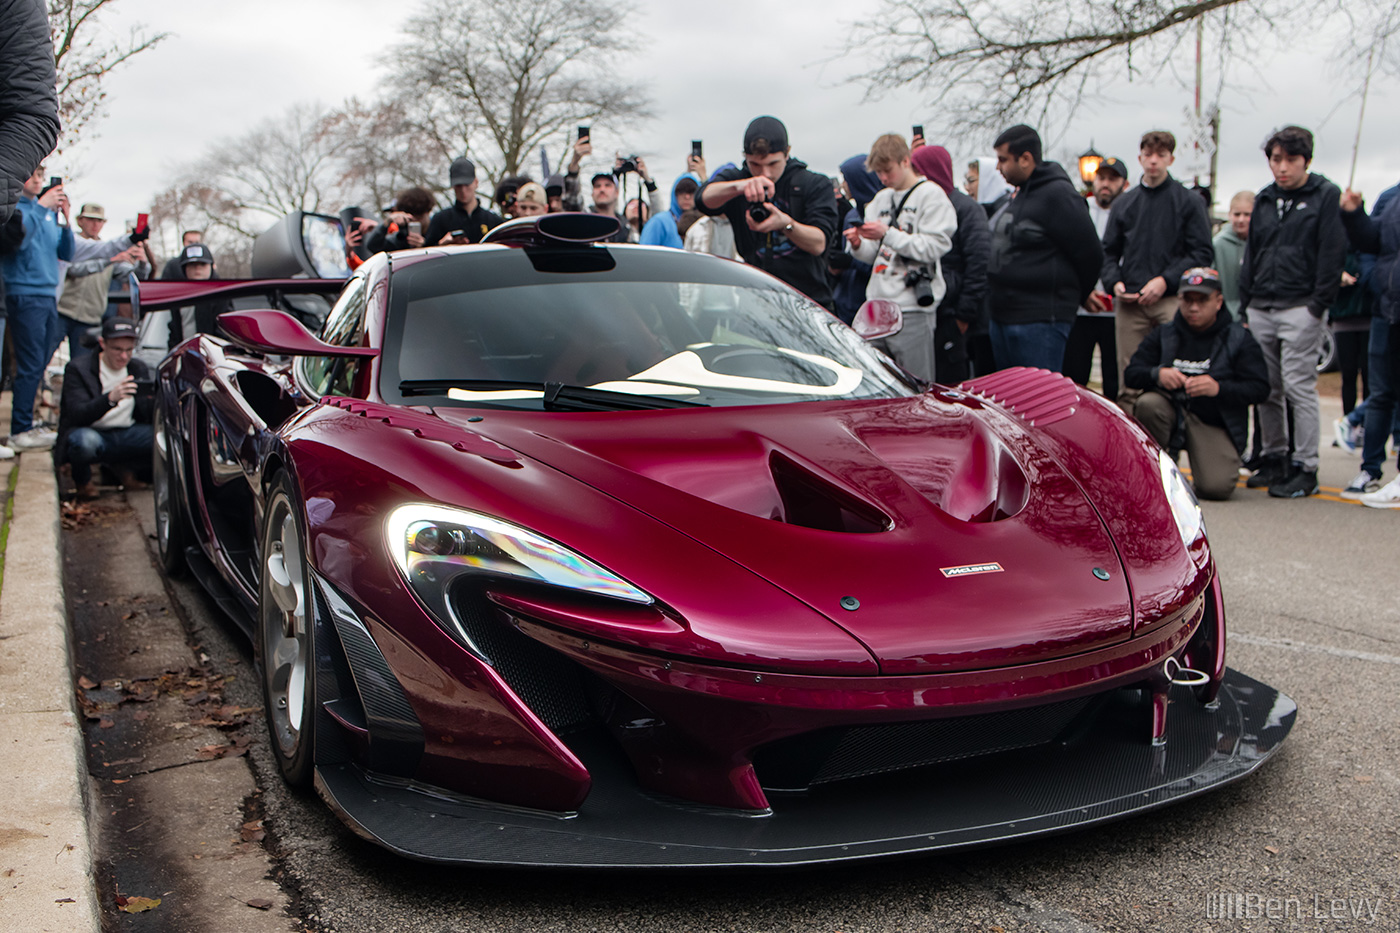 Burgundy McLaren P1 GT at Toy Drive in Hinsdale